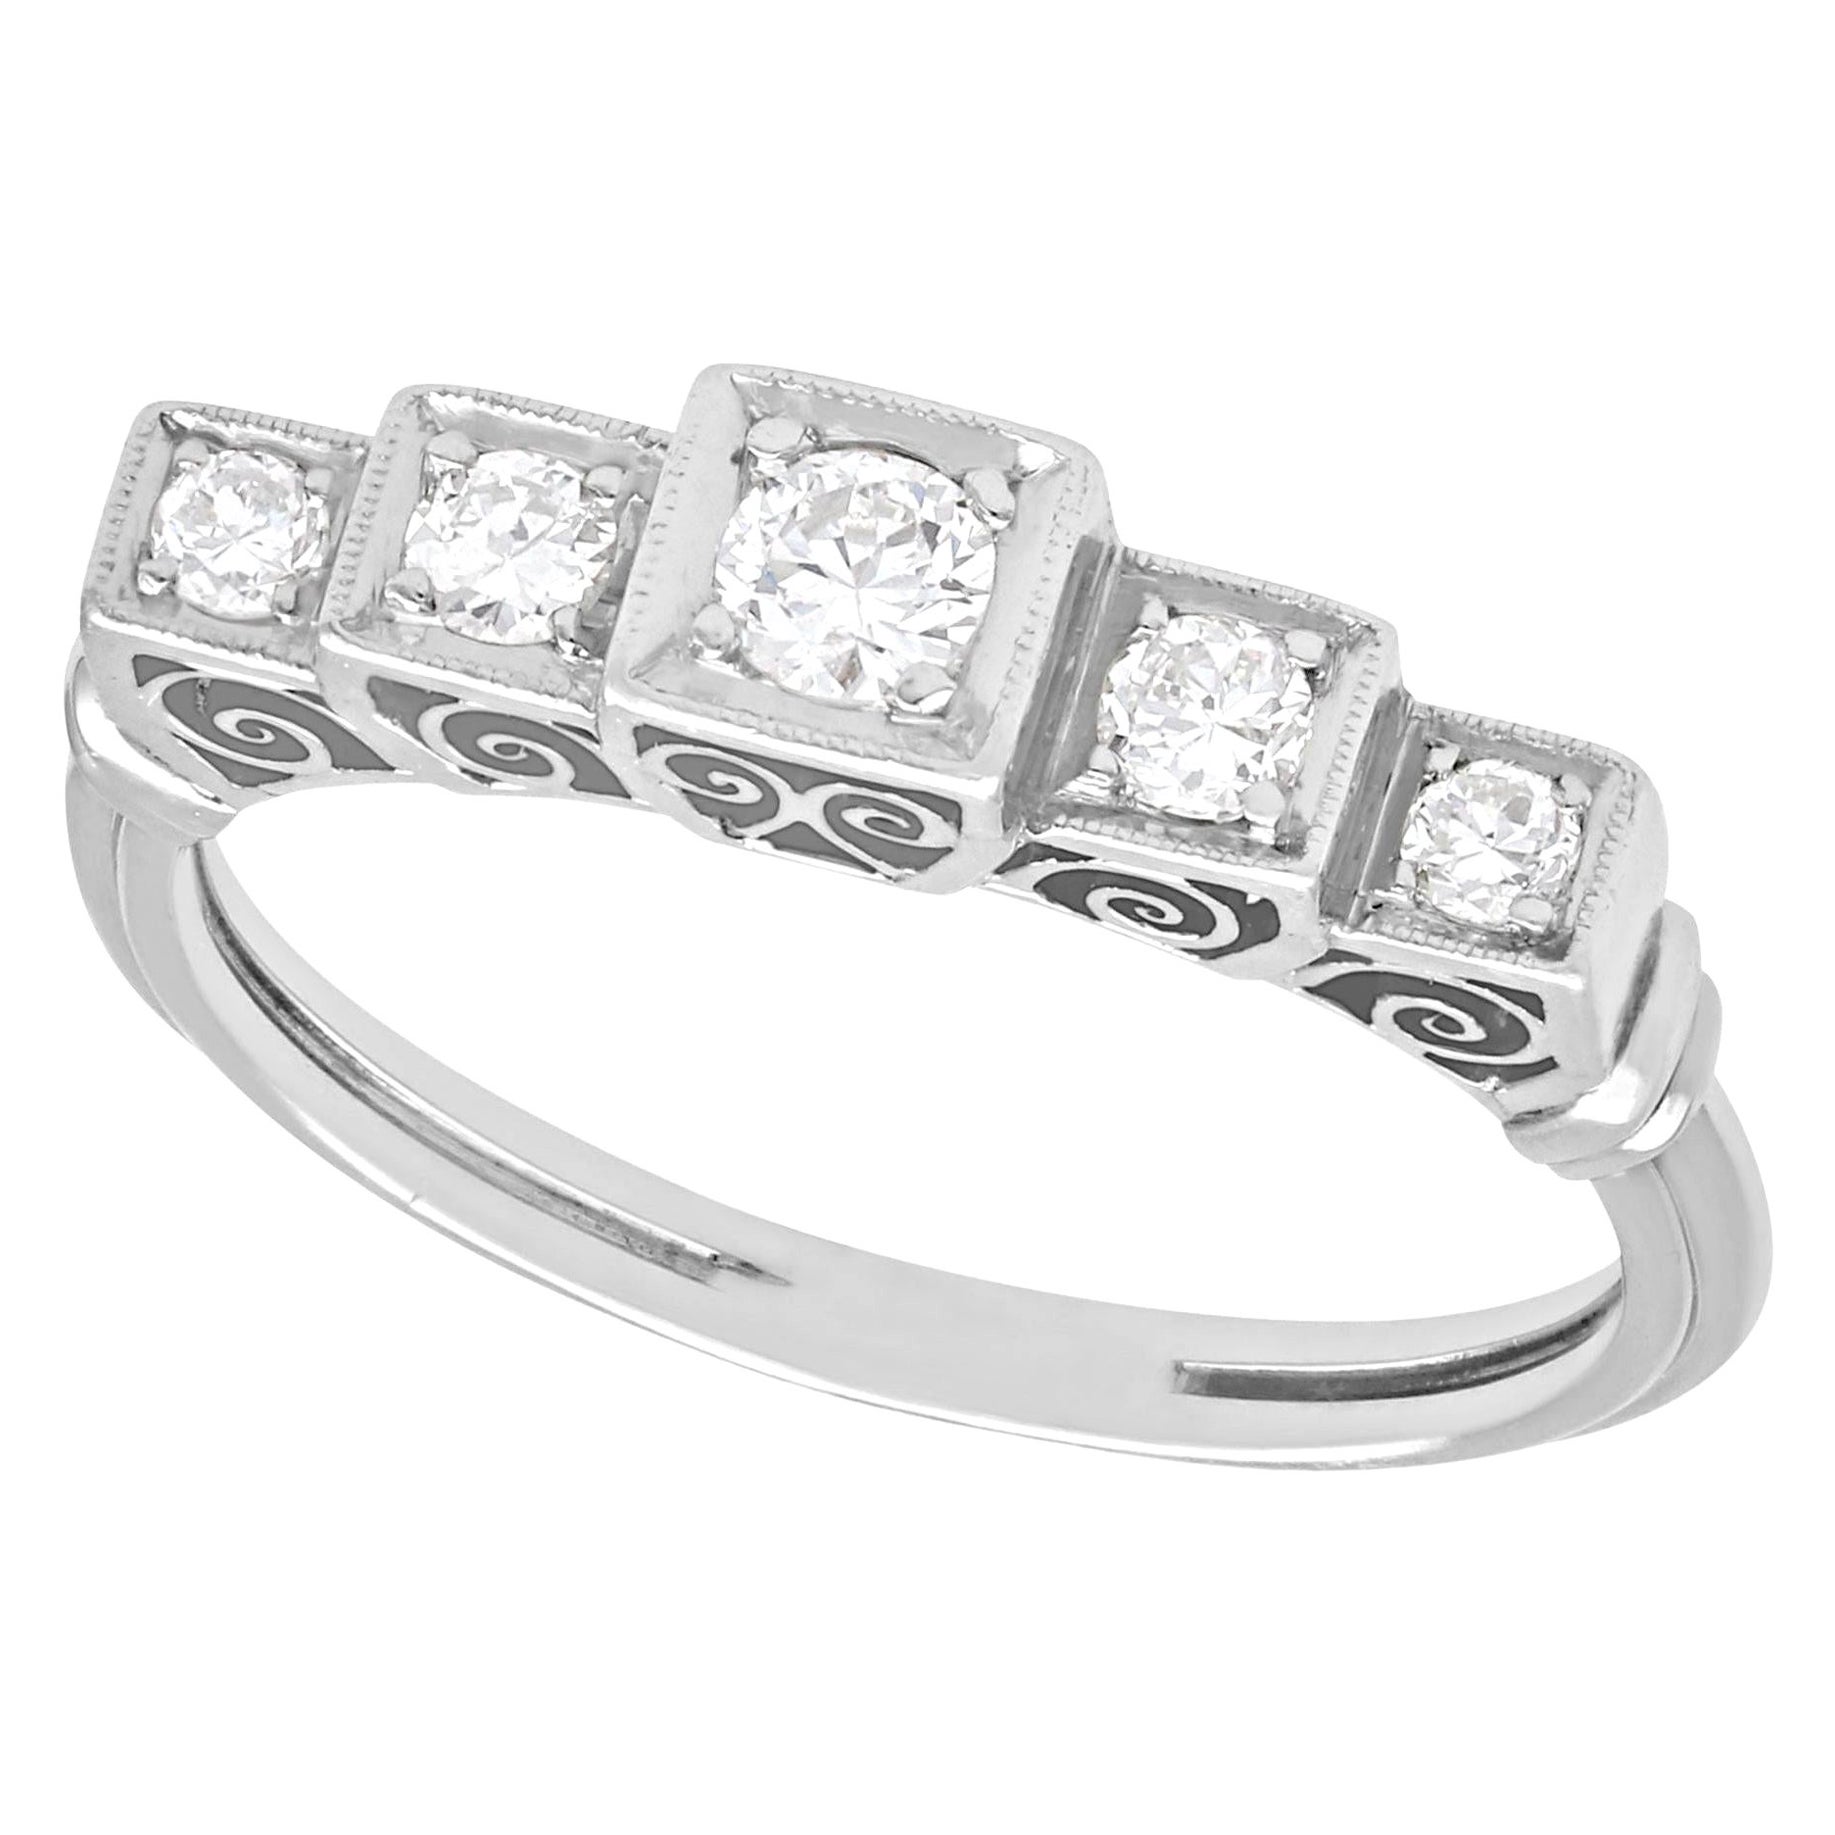 Antique Diamond and White Gold Five Stone Ring